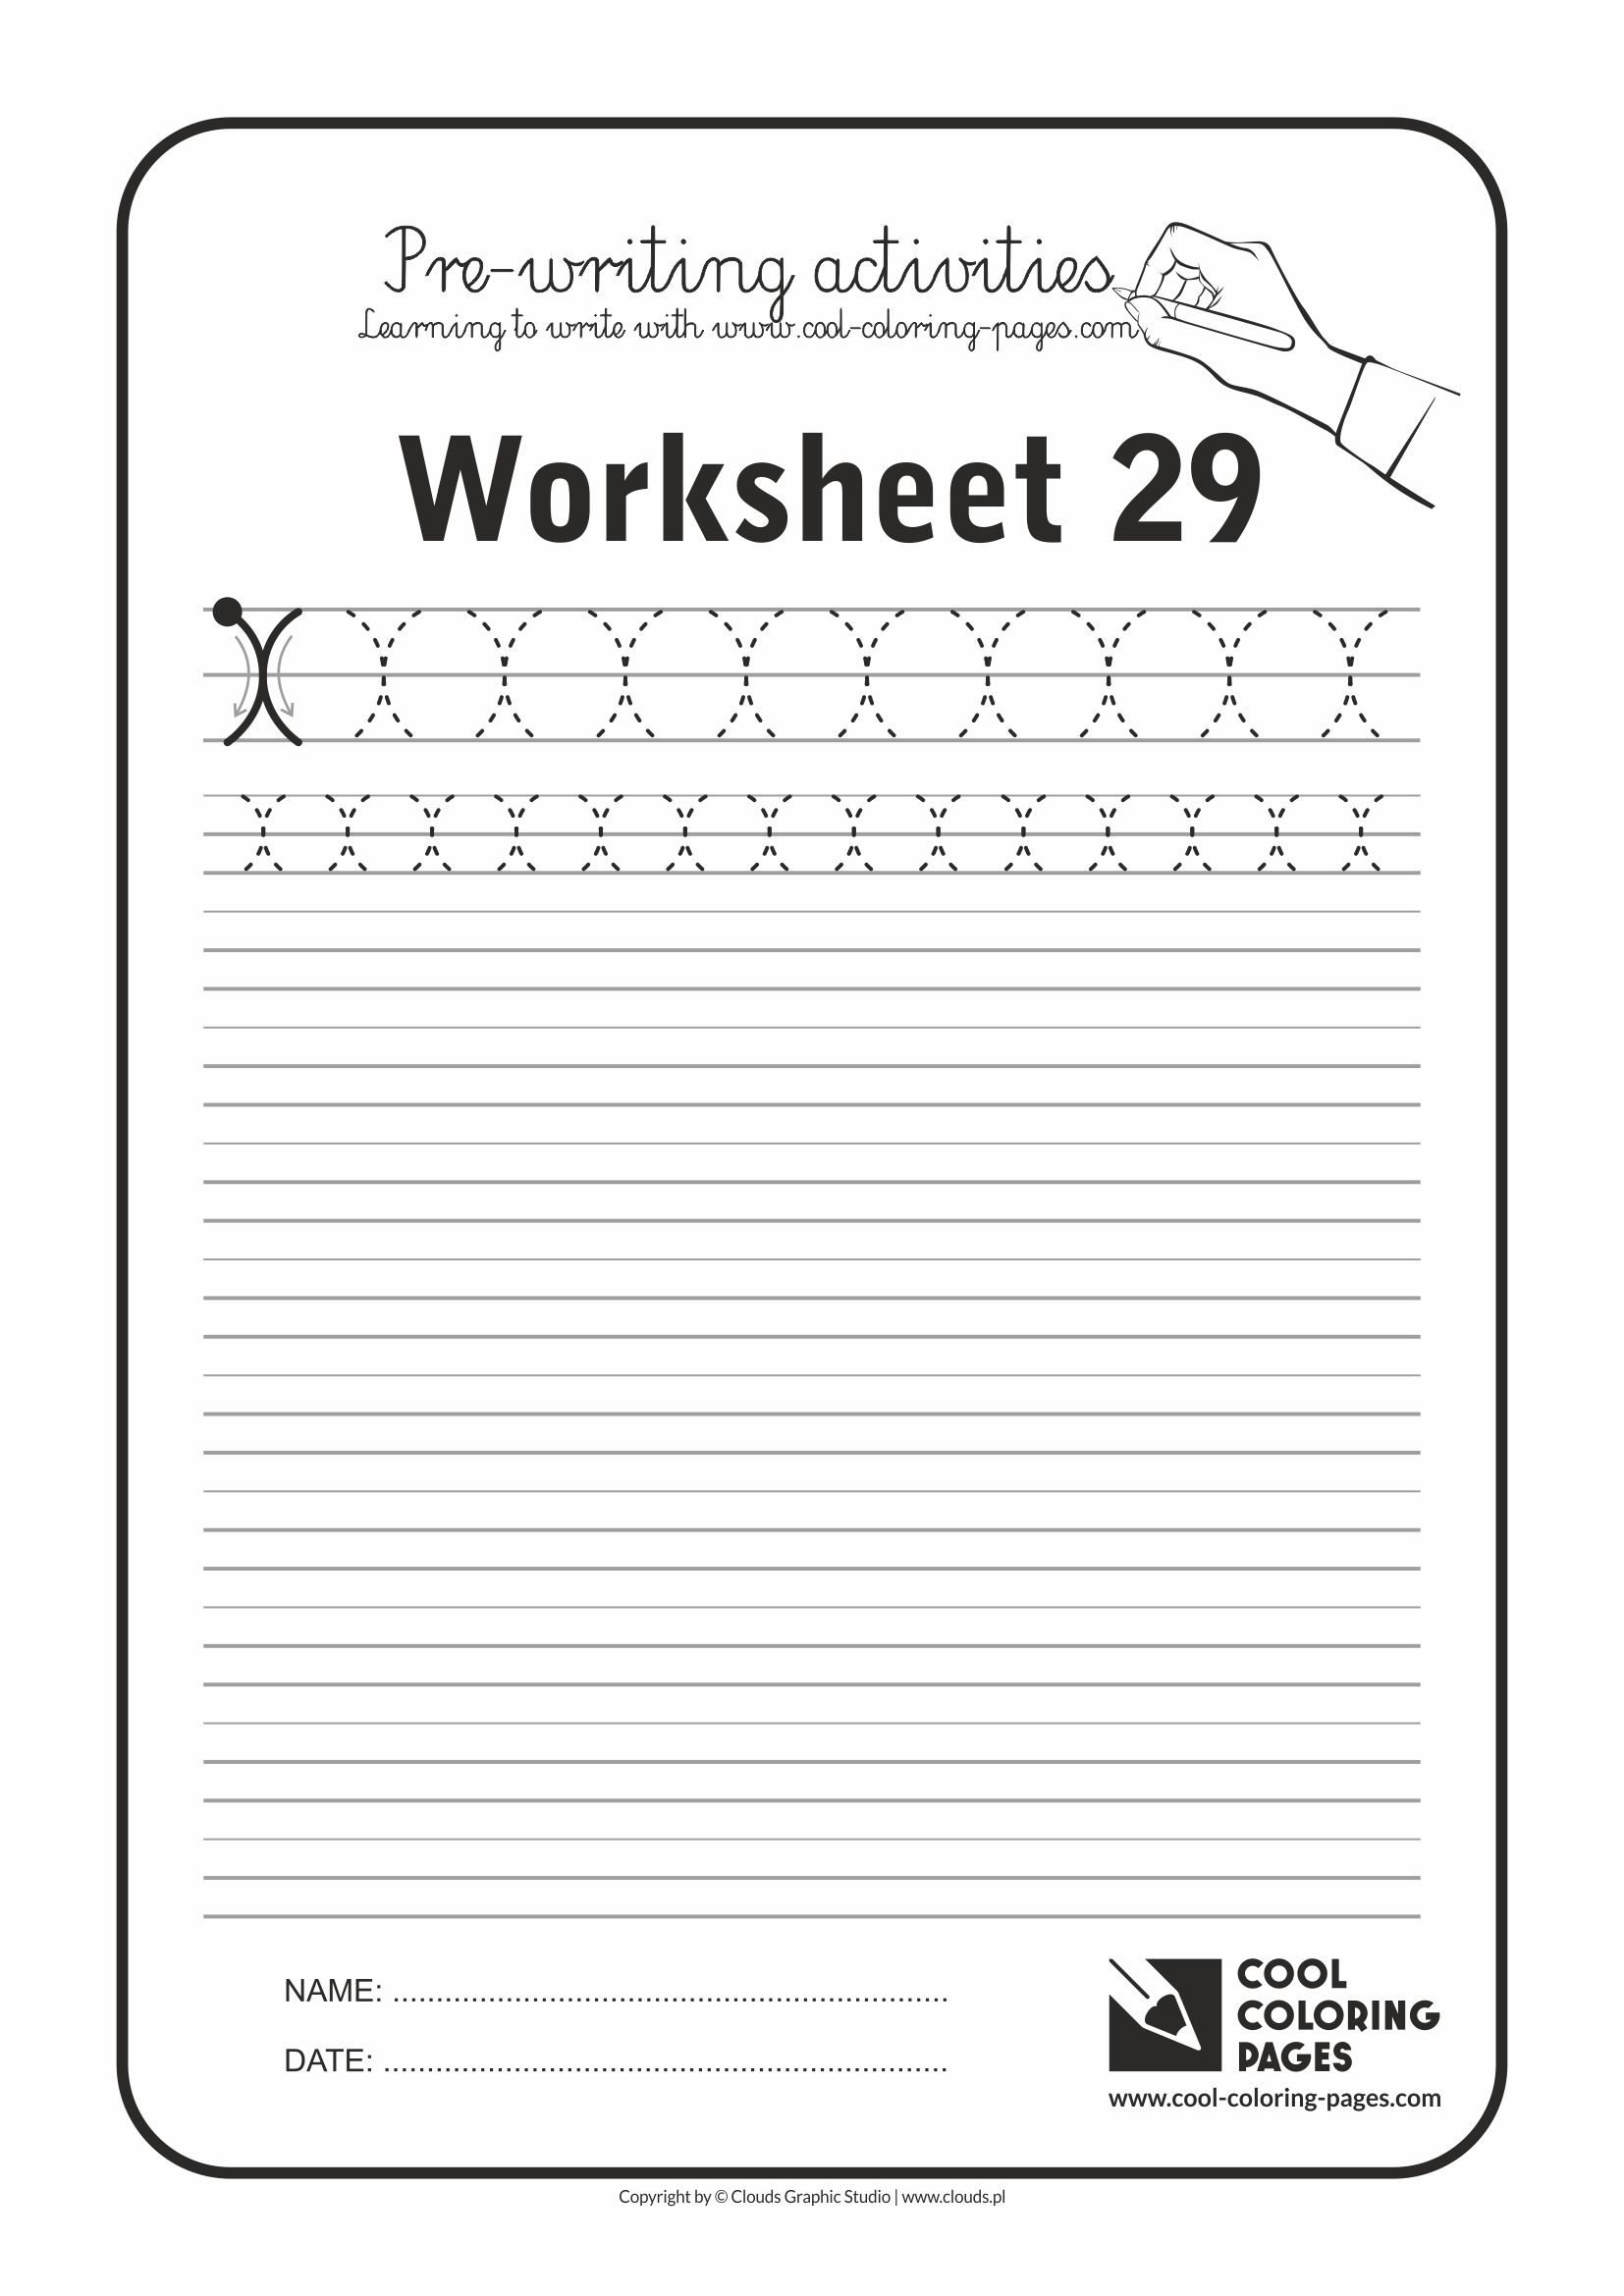 Cool Coloring Pages / Pre-writing activities / Worksheet no.29